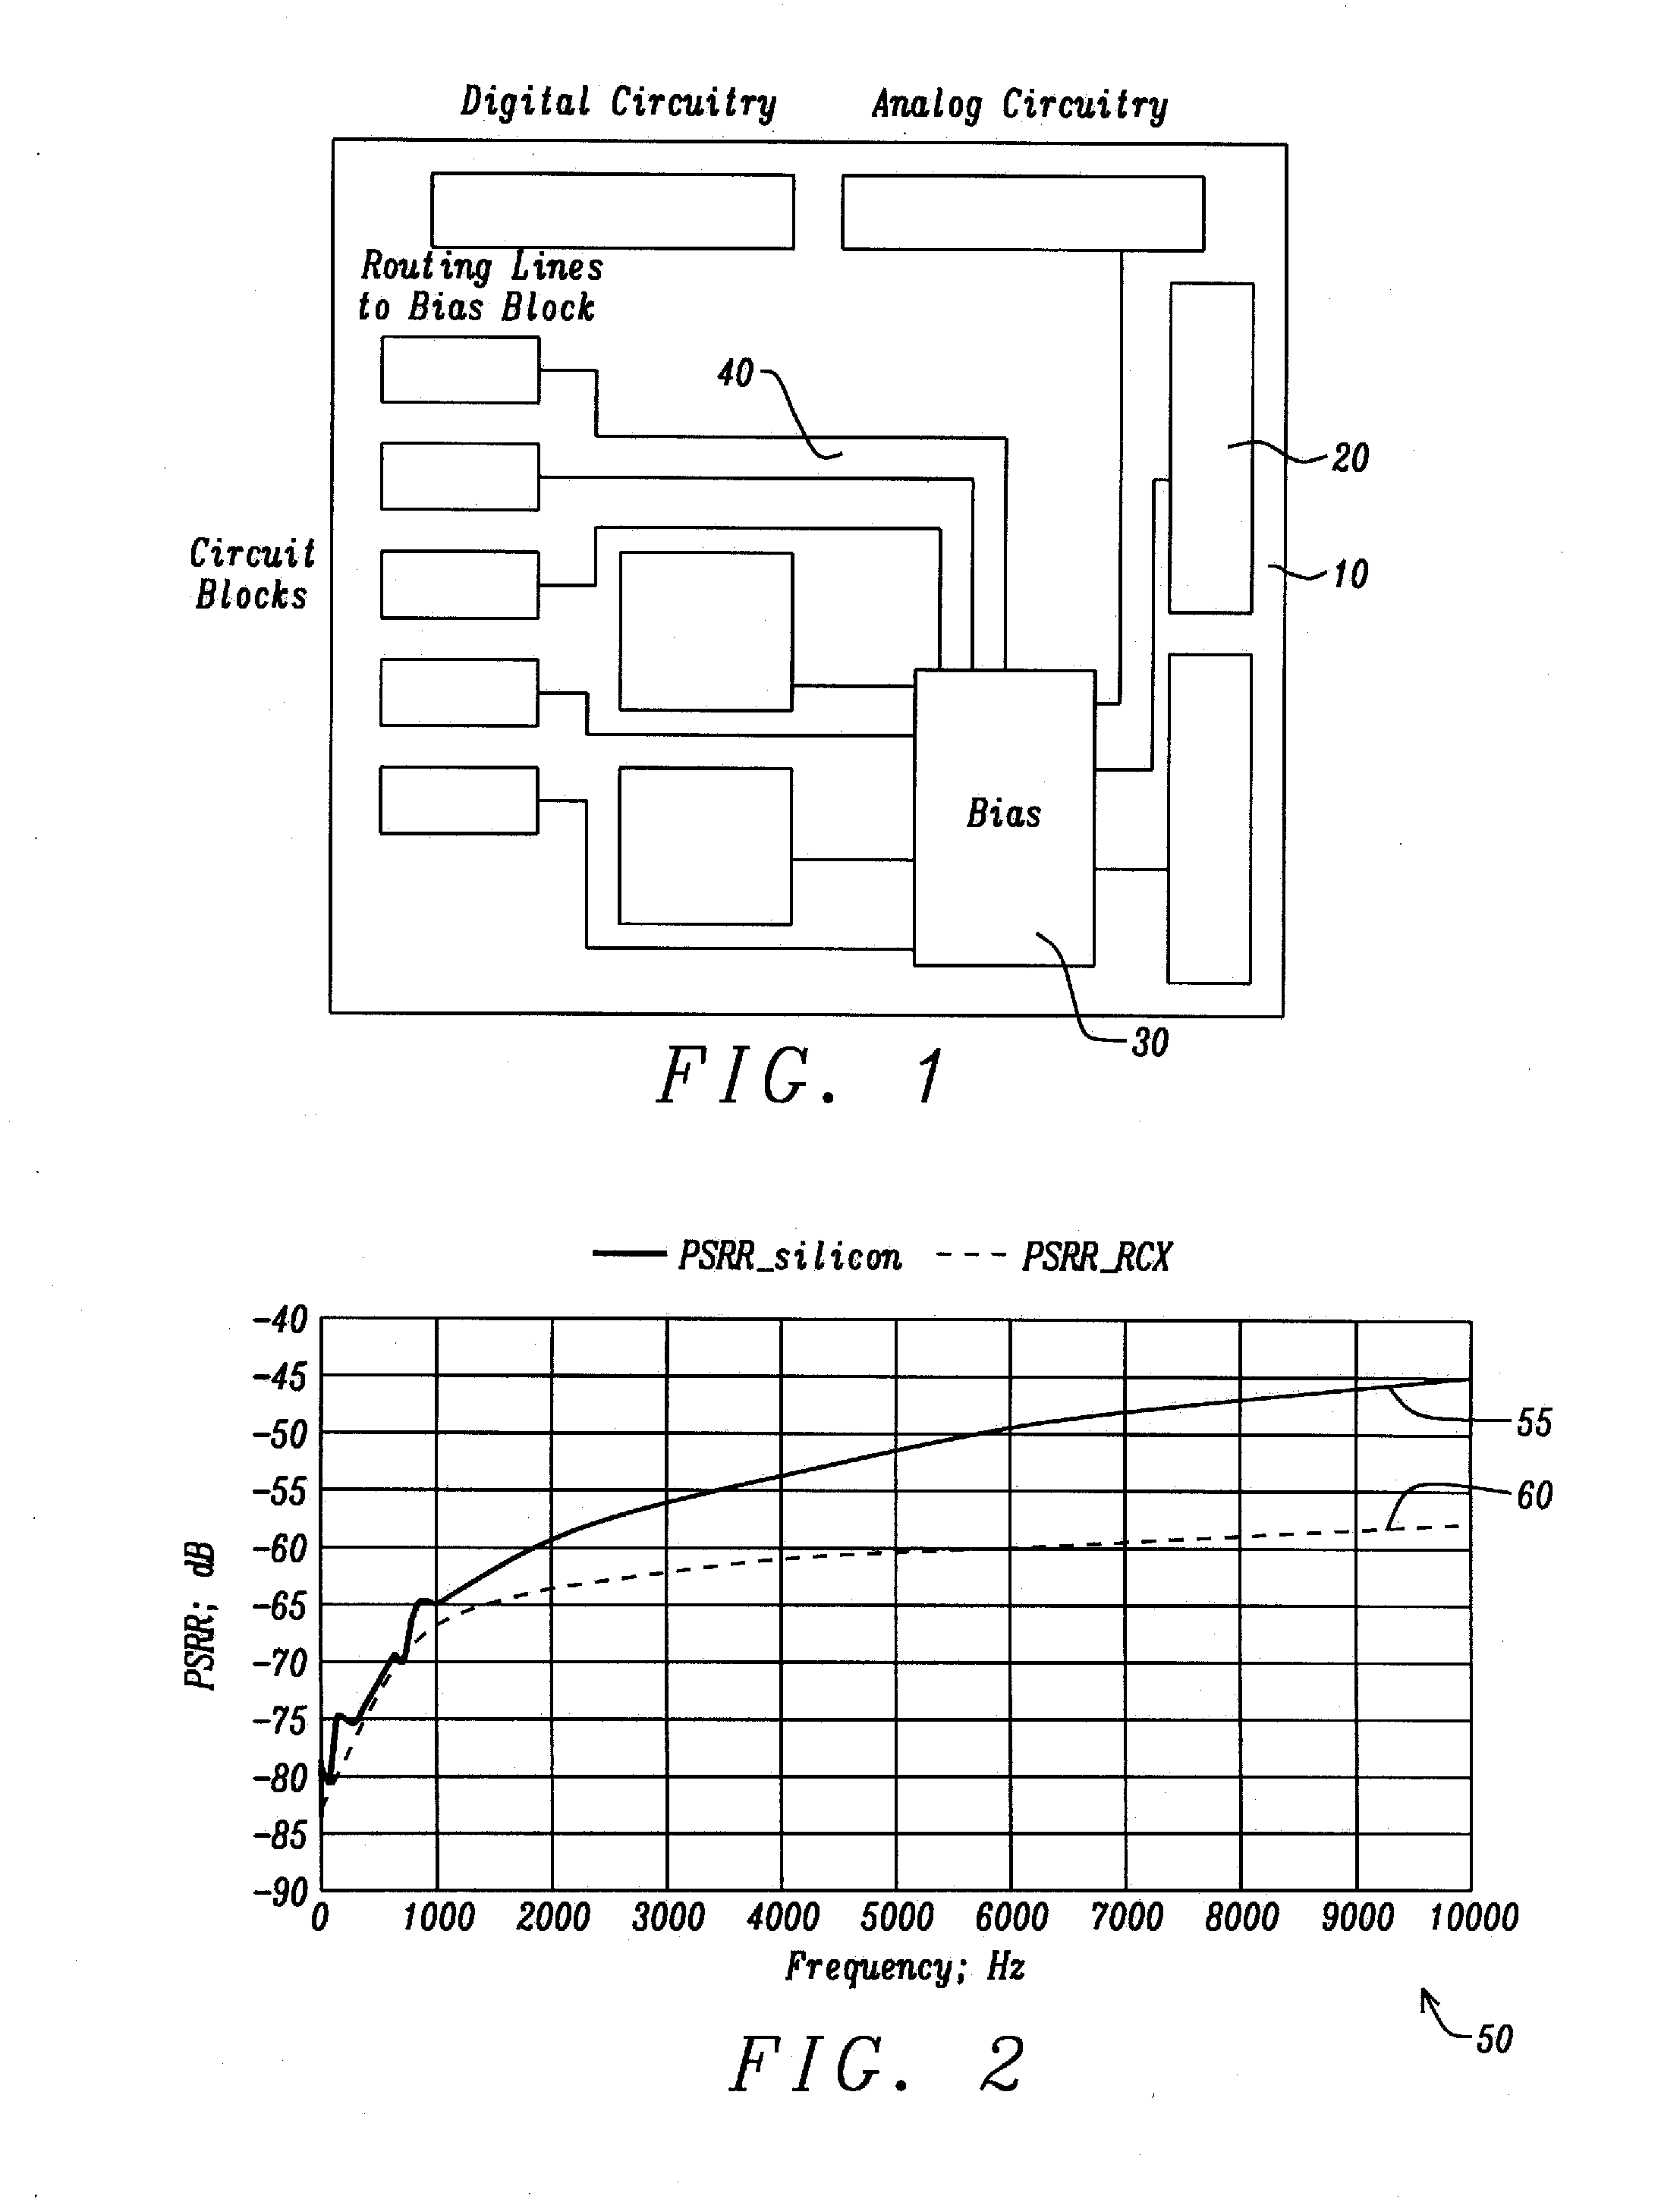 Apparatus and Method for a Voltage Regulator with Improved Power Supply Reduction Ratio (PSRR) with Reduced Parasitic Capacitance on Bias Signal Lines